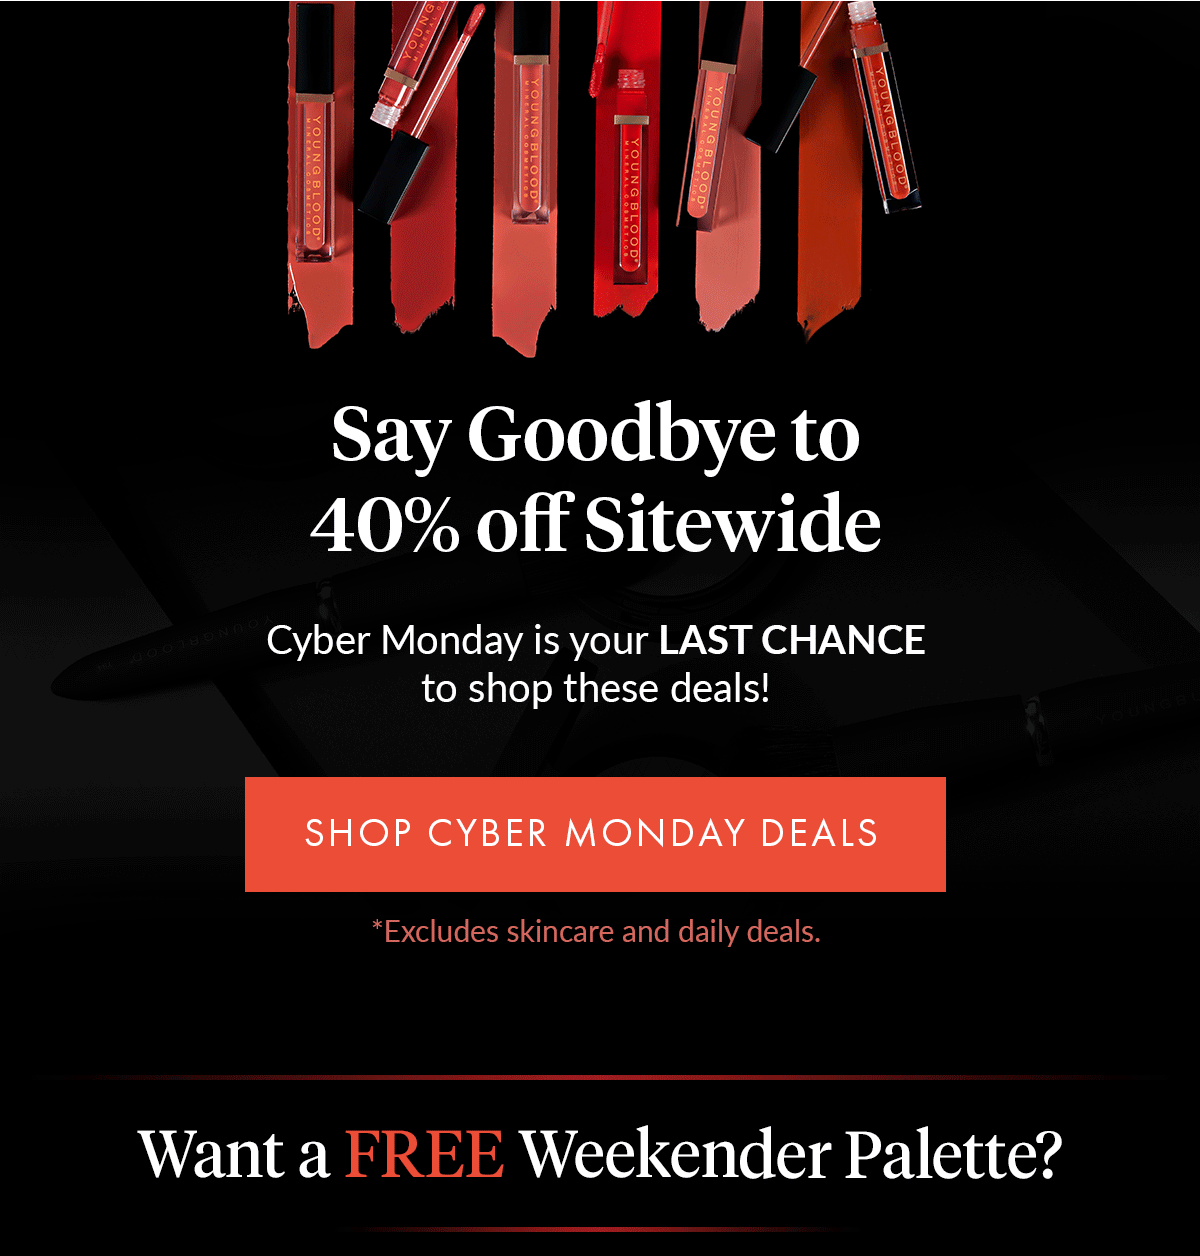 last chance to get 40% off